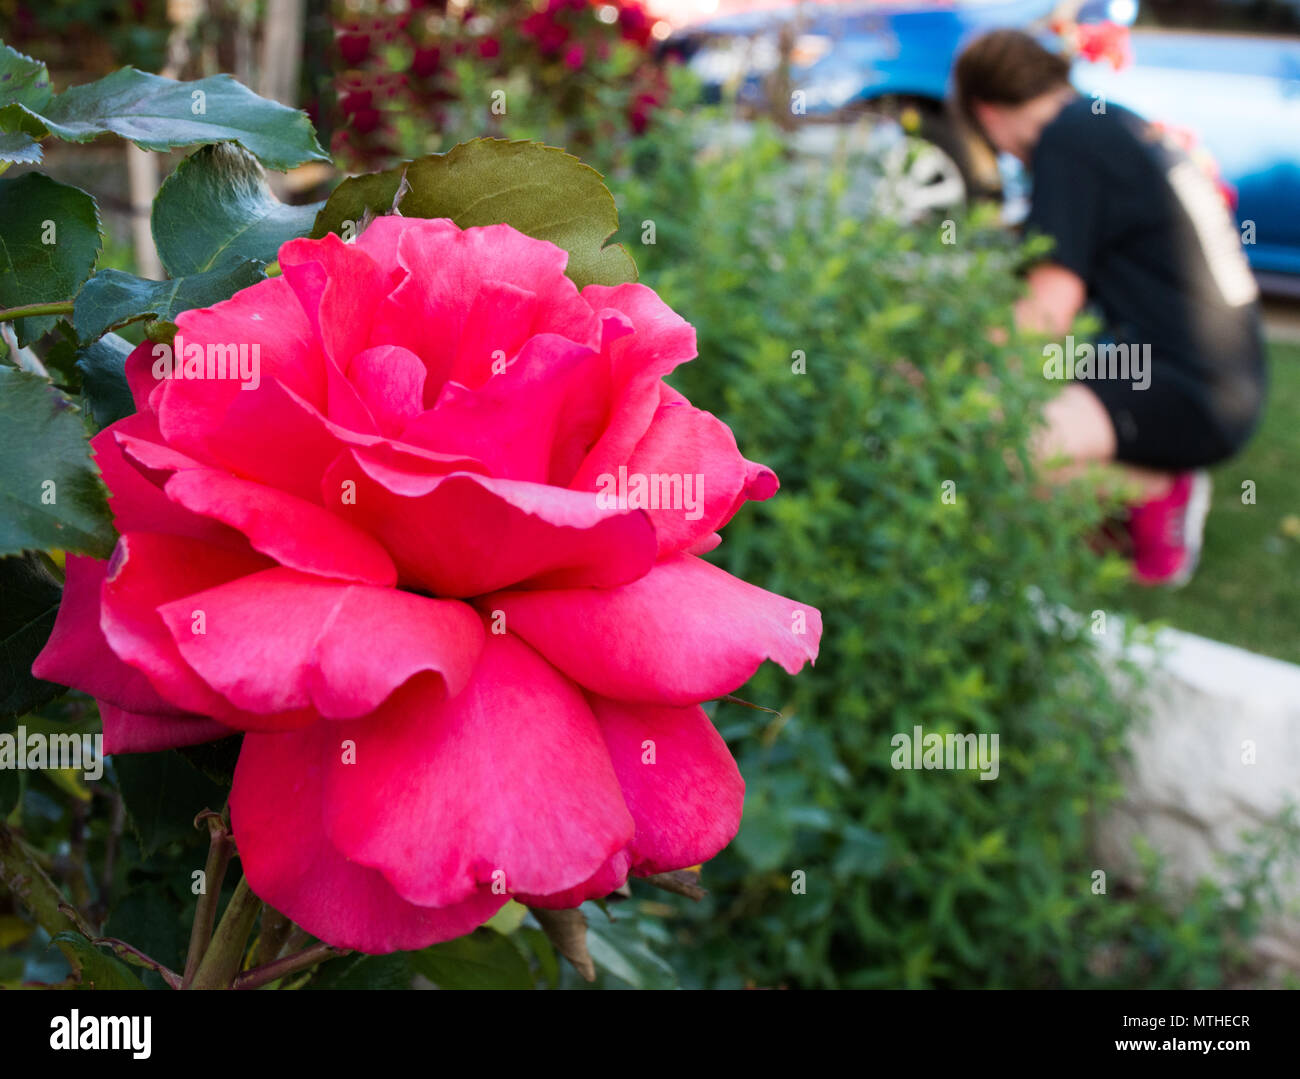 Closeup of single Fragrant Cloud rose with silky petals with green foliage background.  Young woman cleaning flowerbed in background. Stock Photo